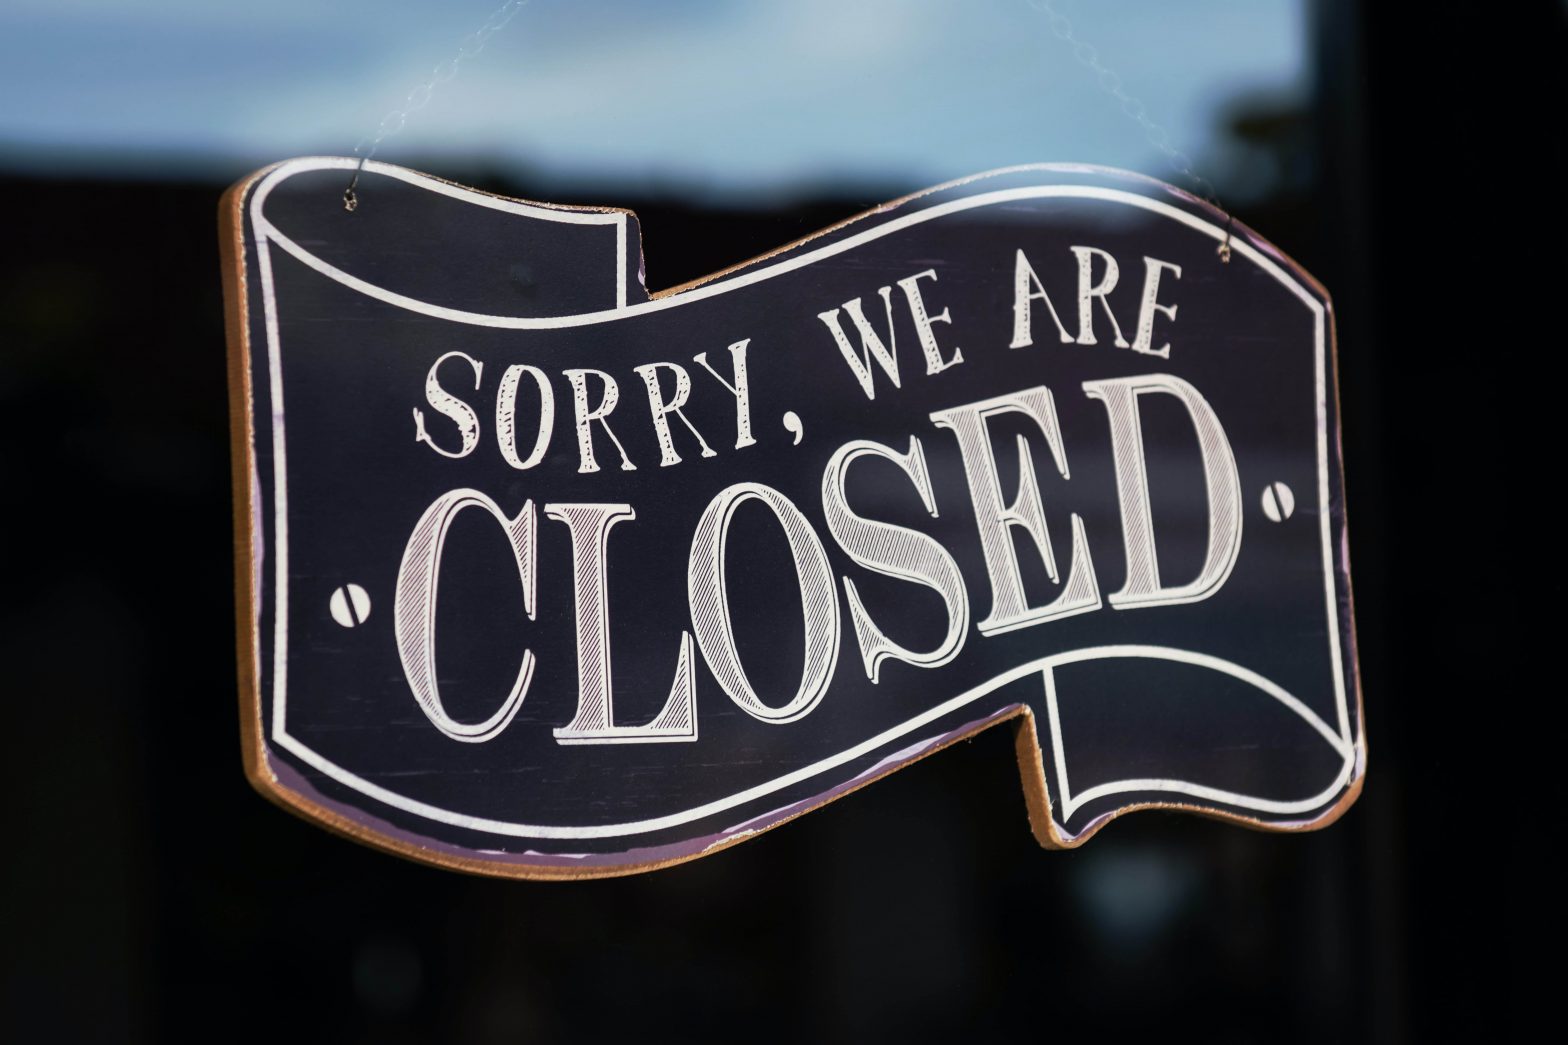 closed business sign